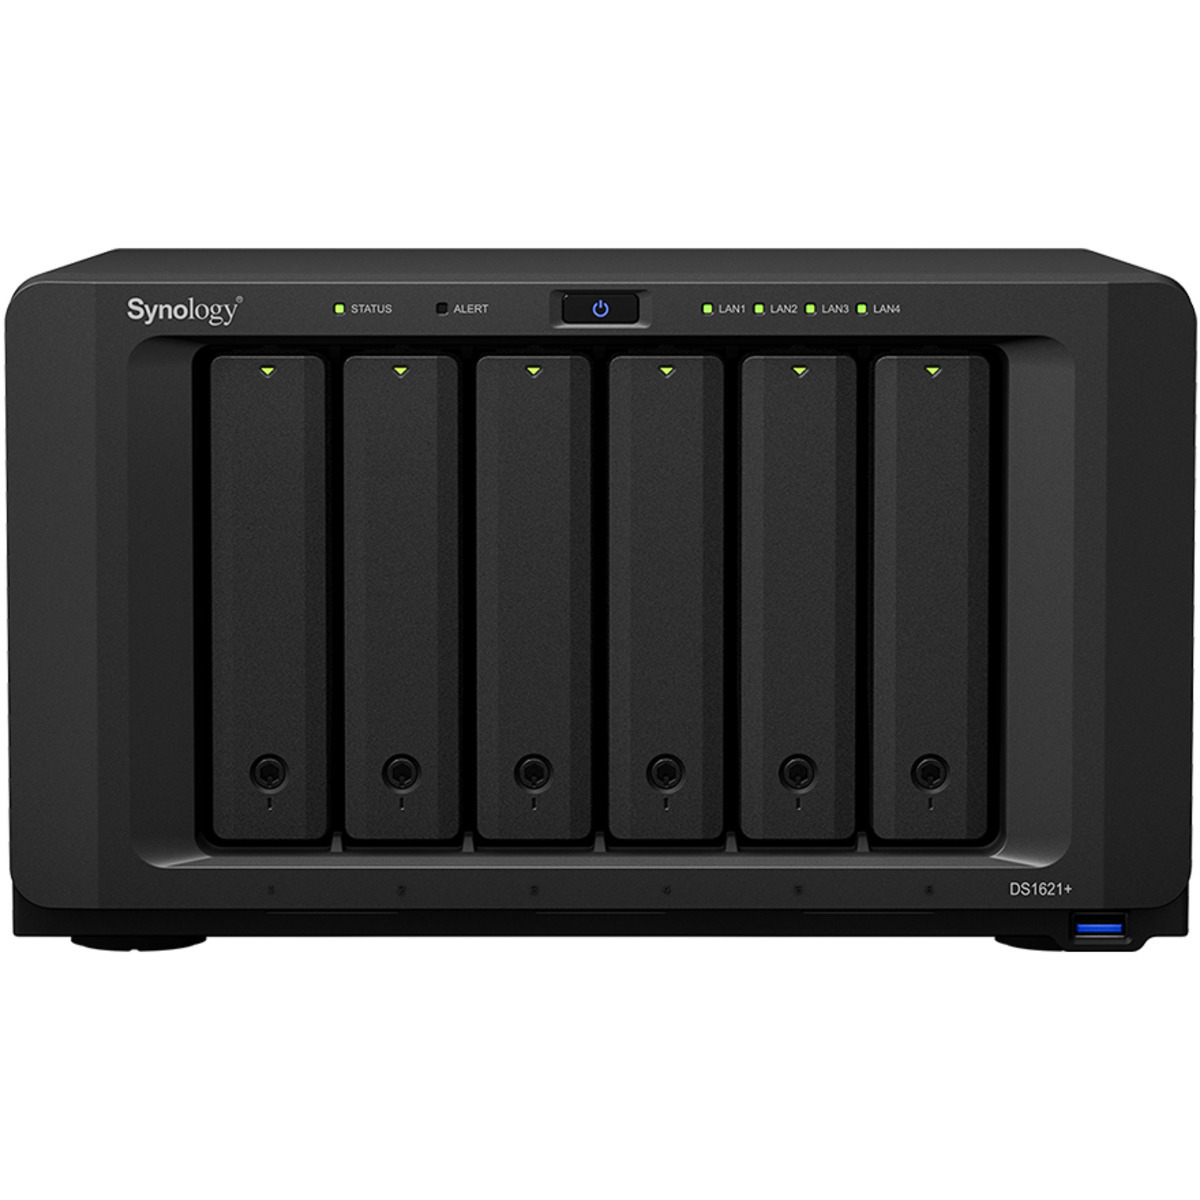 Synology DiskStation DS1621+ 24tb 6-Bay Desktop Multimedia / Power User / Business NAS - Network Attached Storage Device 6x4tb Sandisk Ultra 3D SDSSDH3-4T00 2.5 560/520MB/s SATA 6Gb/s SSD CONSUMER Class Drives Installed - Burn-In Tested - FREE RAM UPGRADE DiskStation DS1621+